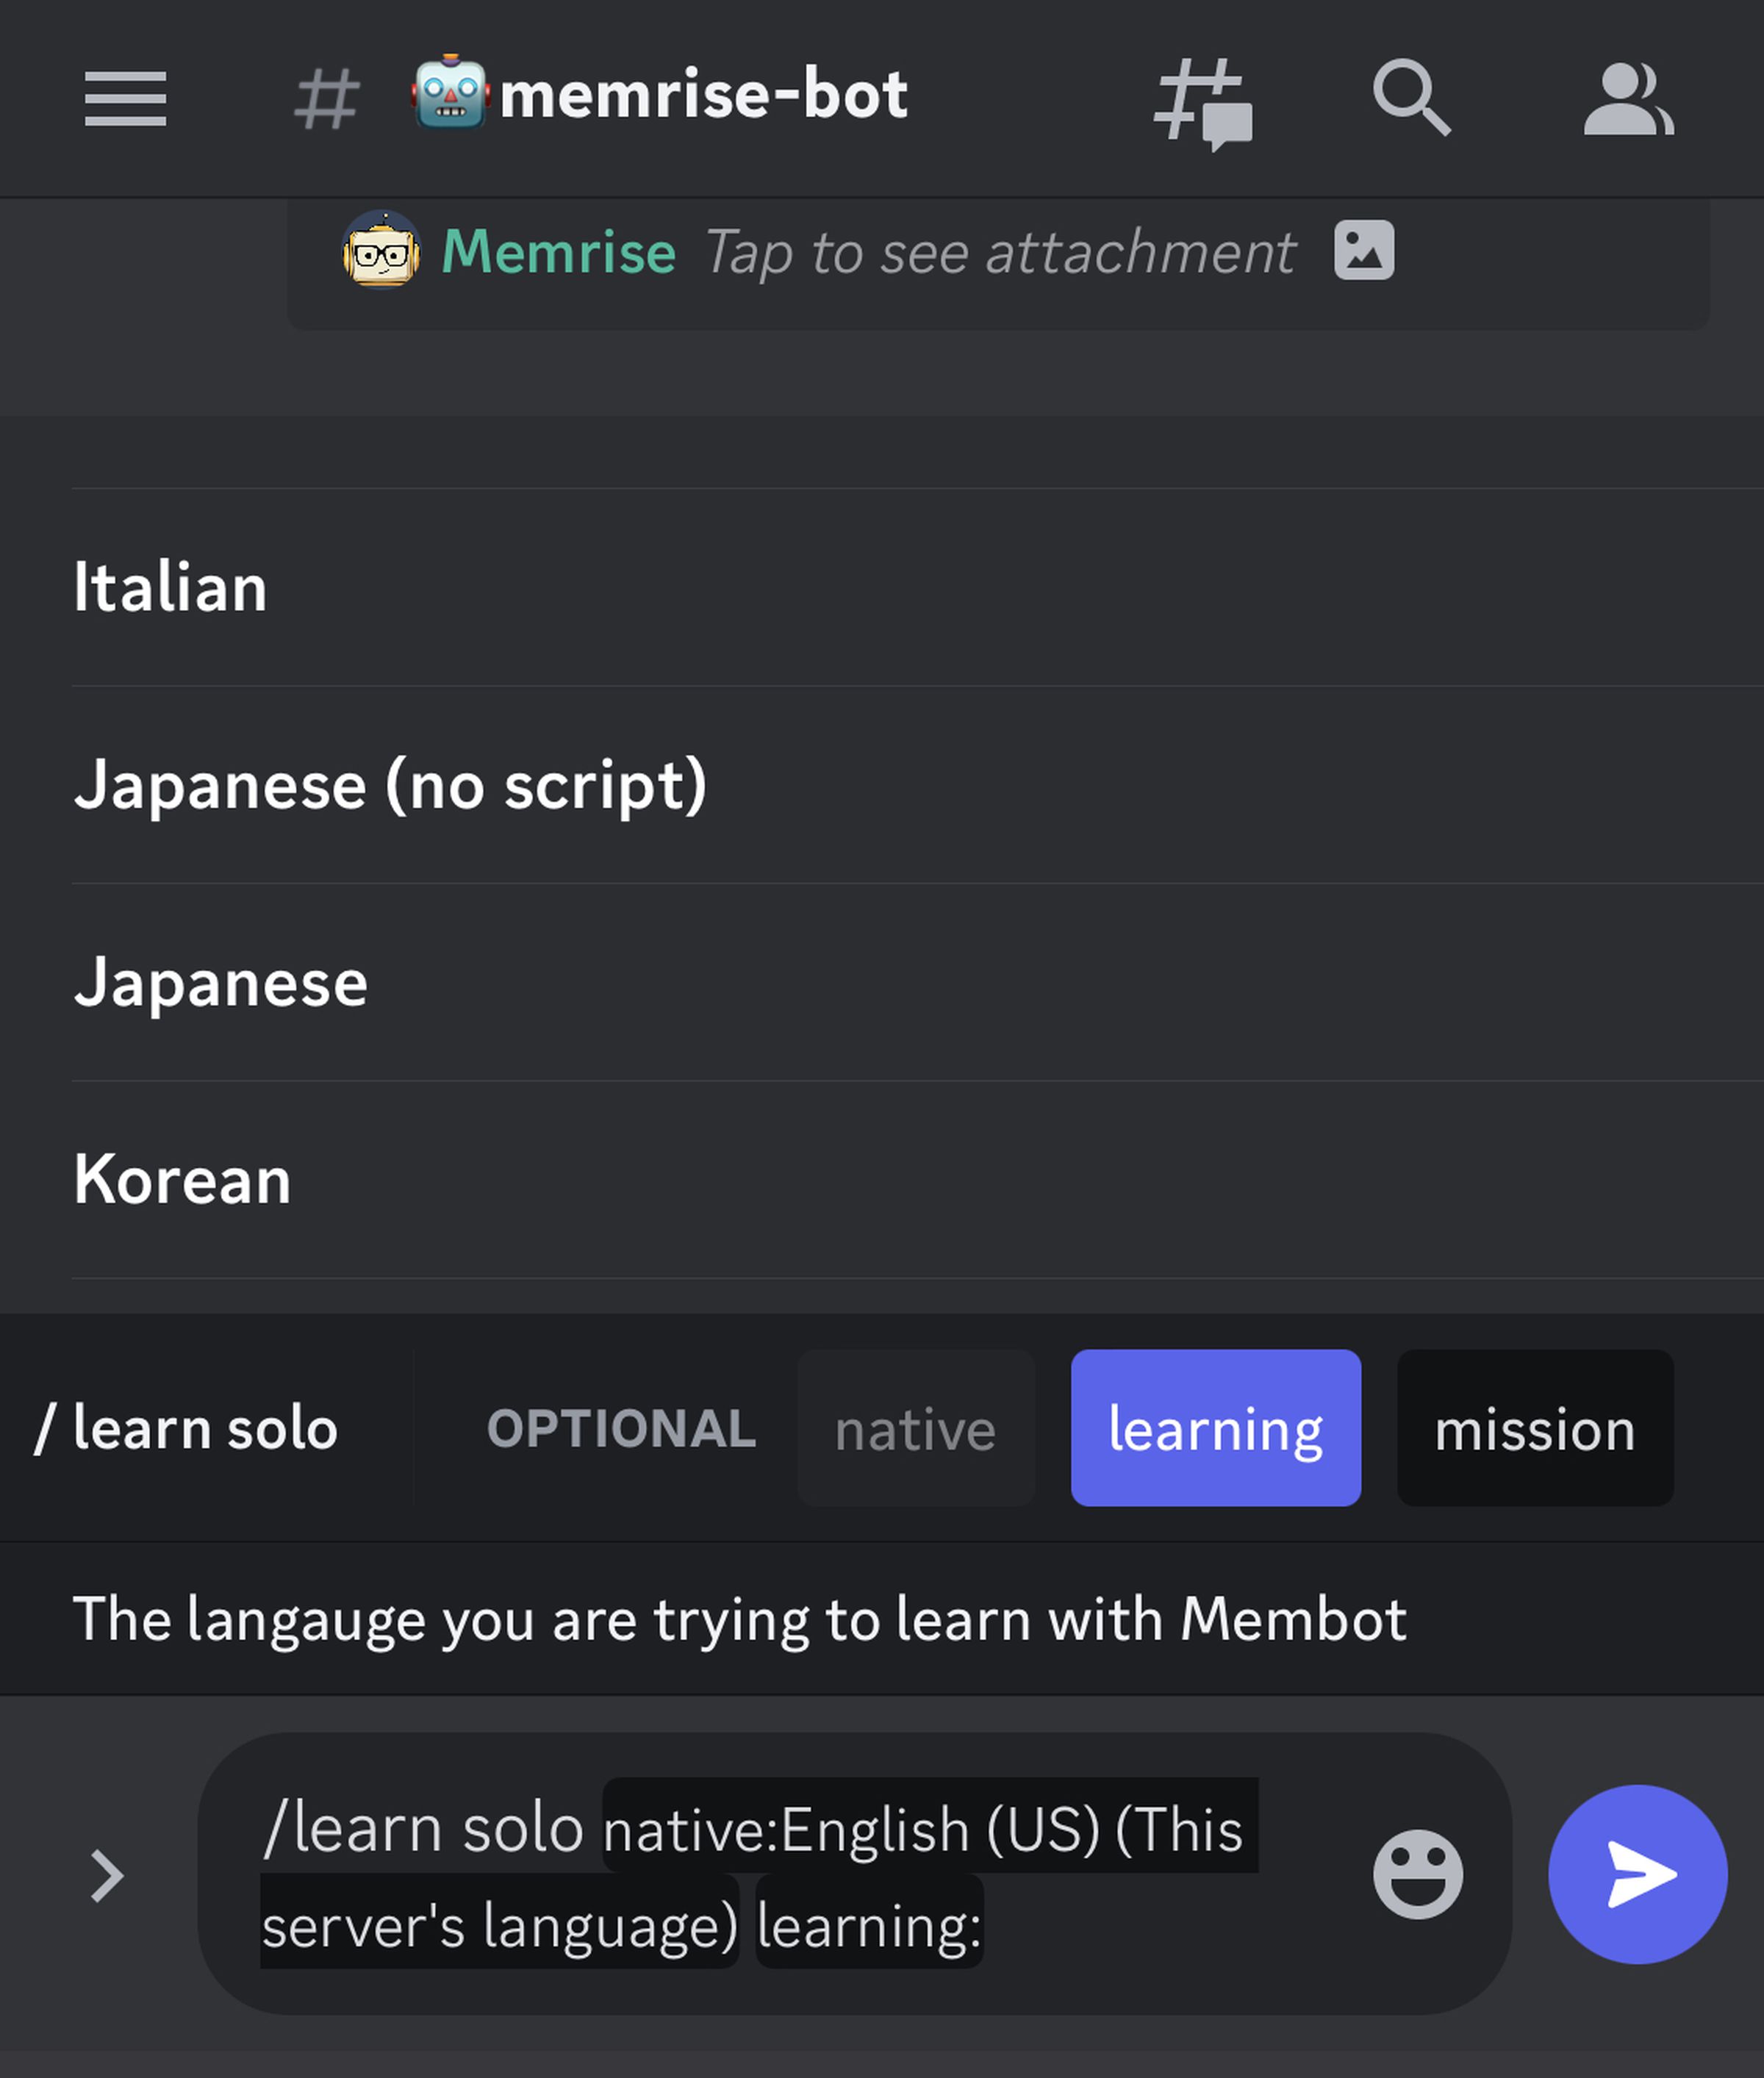 A screenshot of a Discord server where a user has typed the /learn solo command and selected their native language as English US.